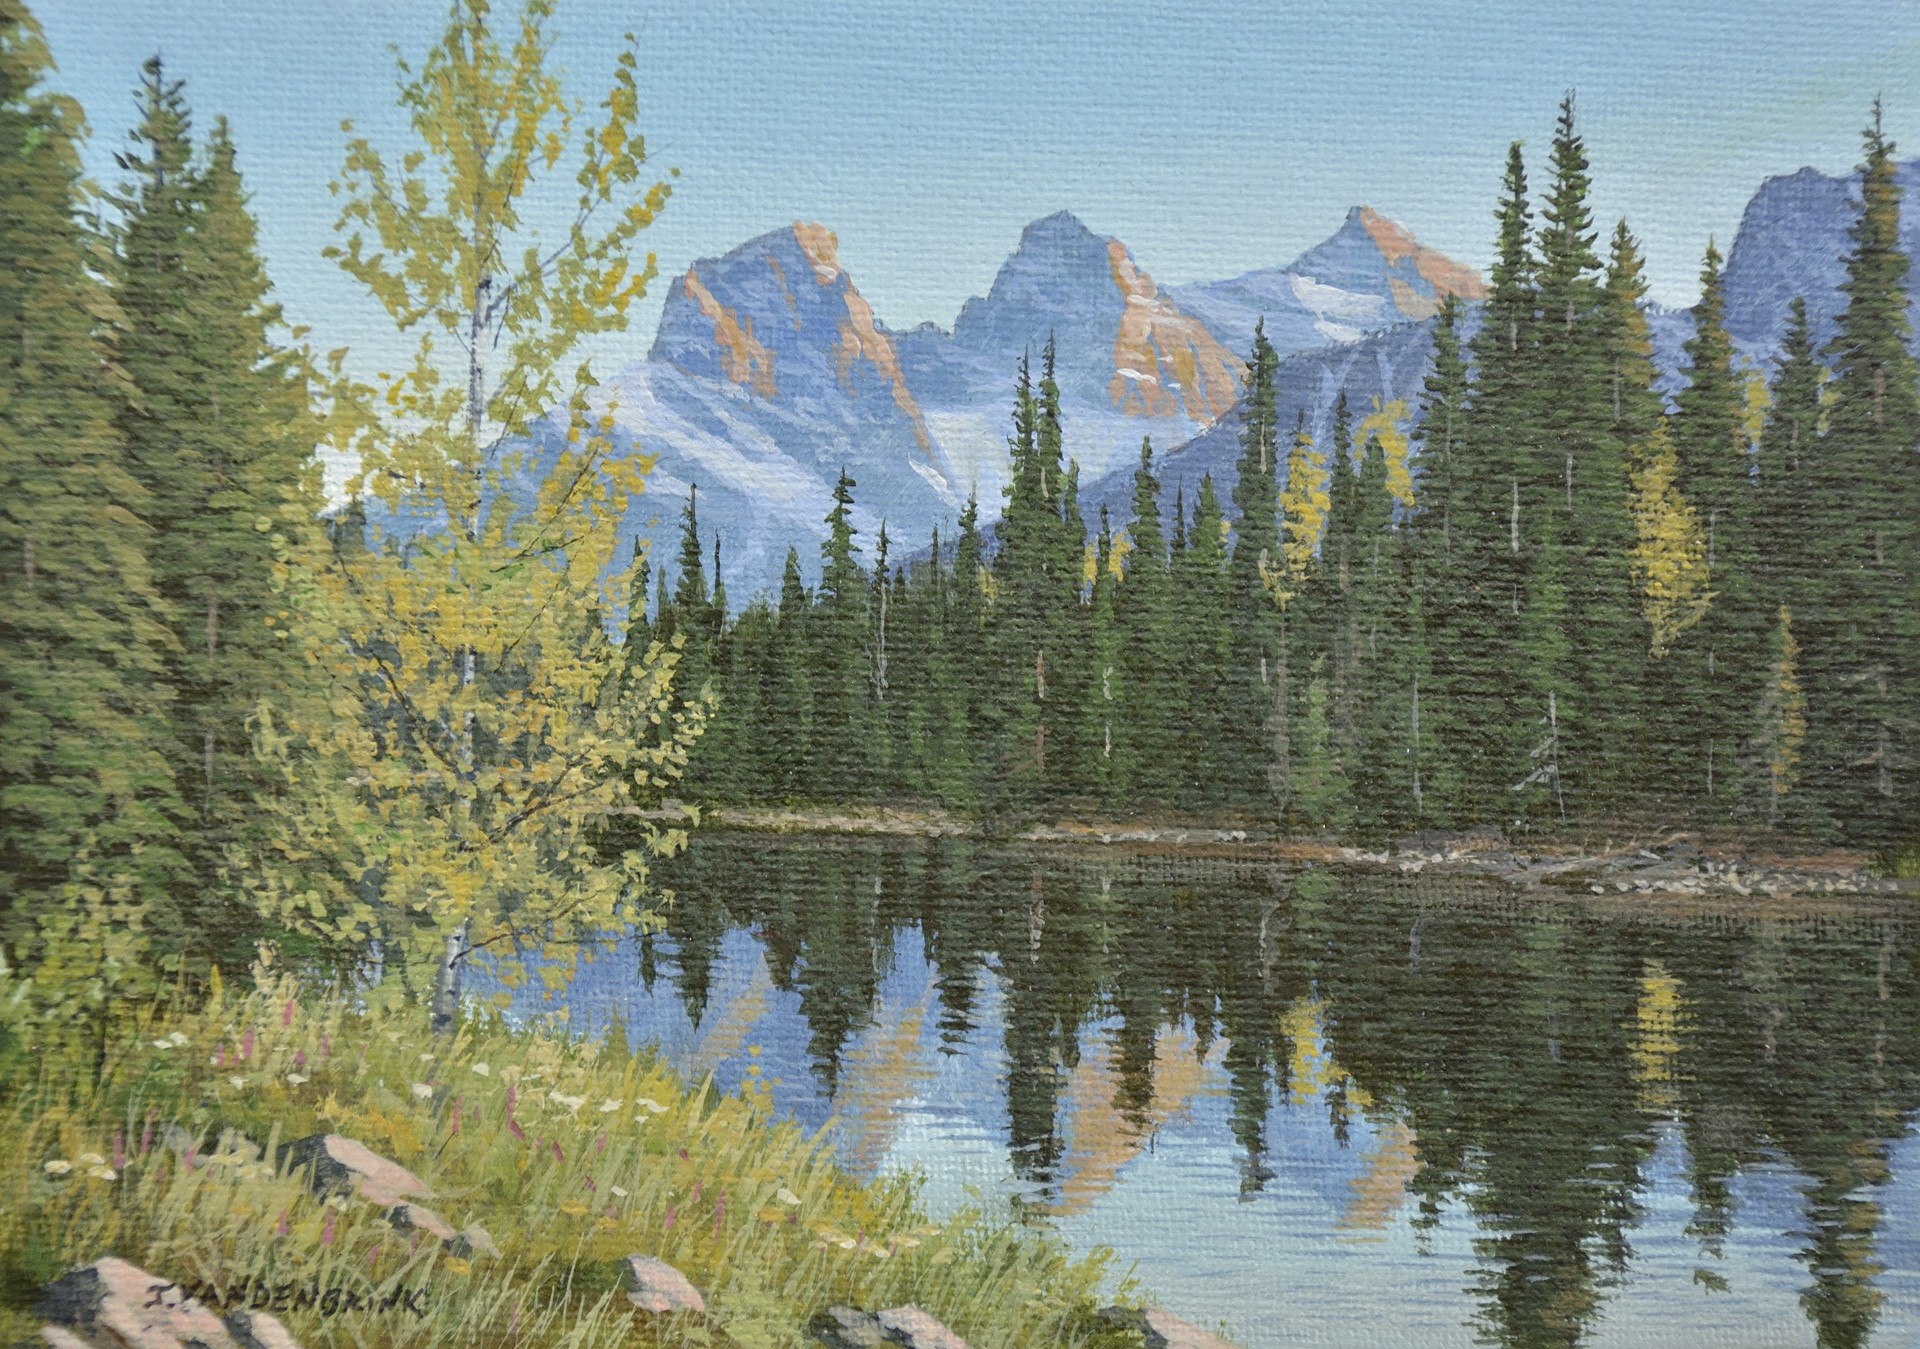 Along the River (Three Sisters, Canmore) by Jake Vandenbrink